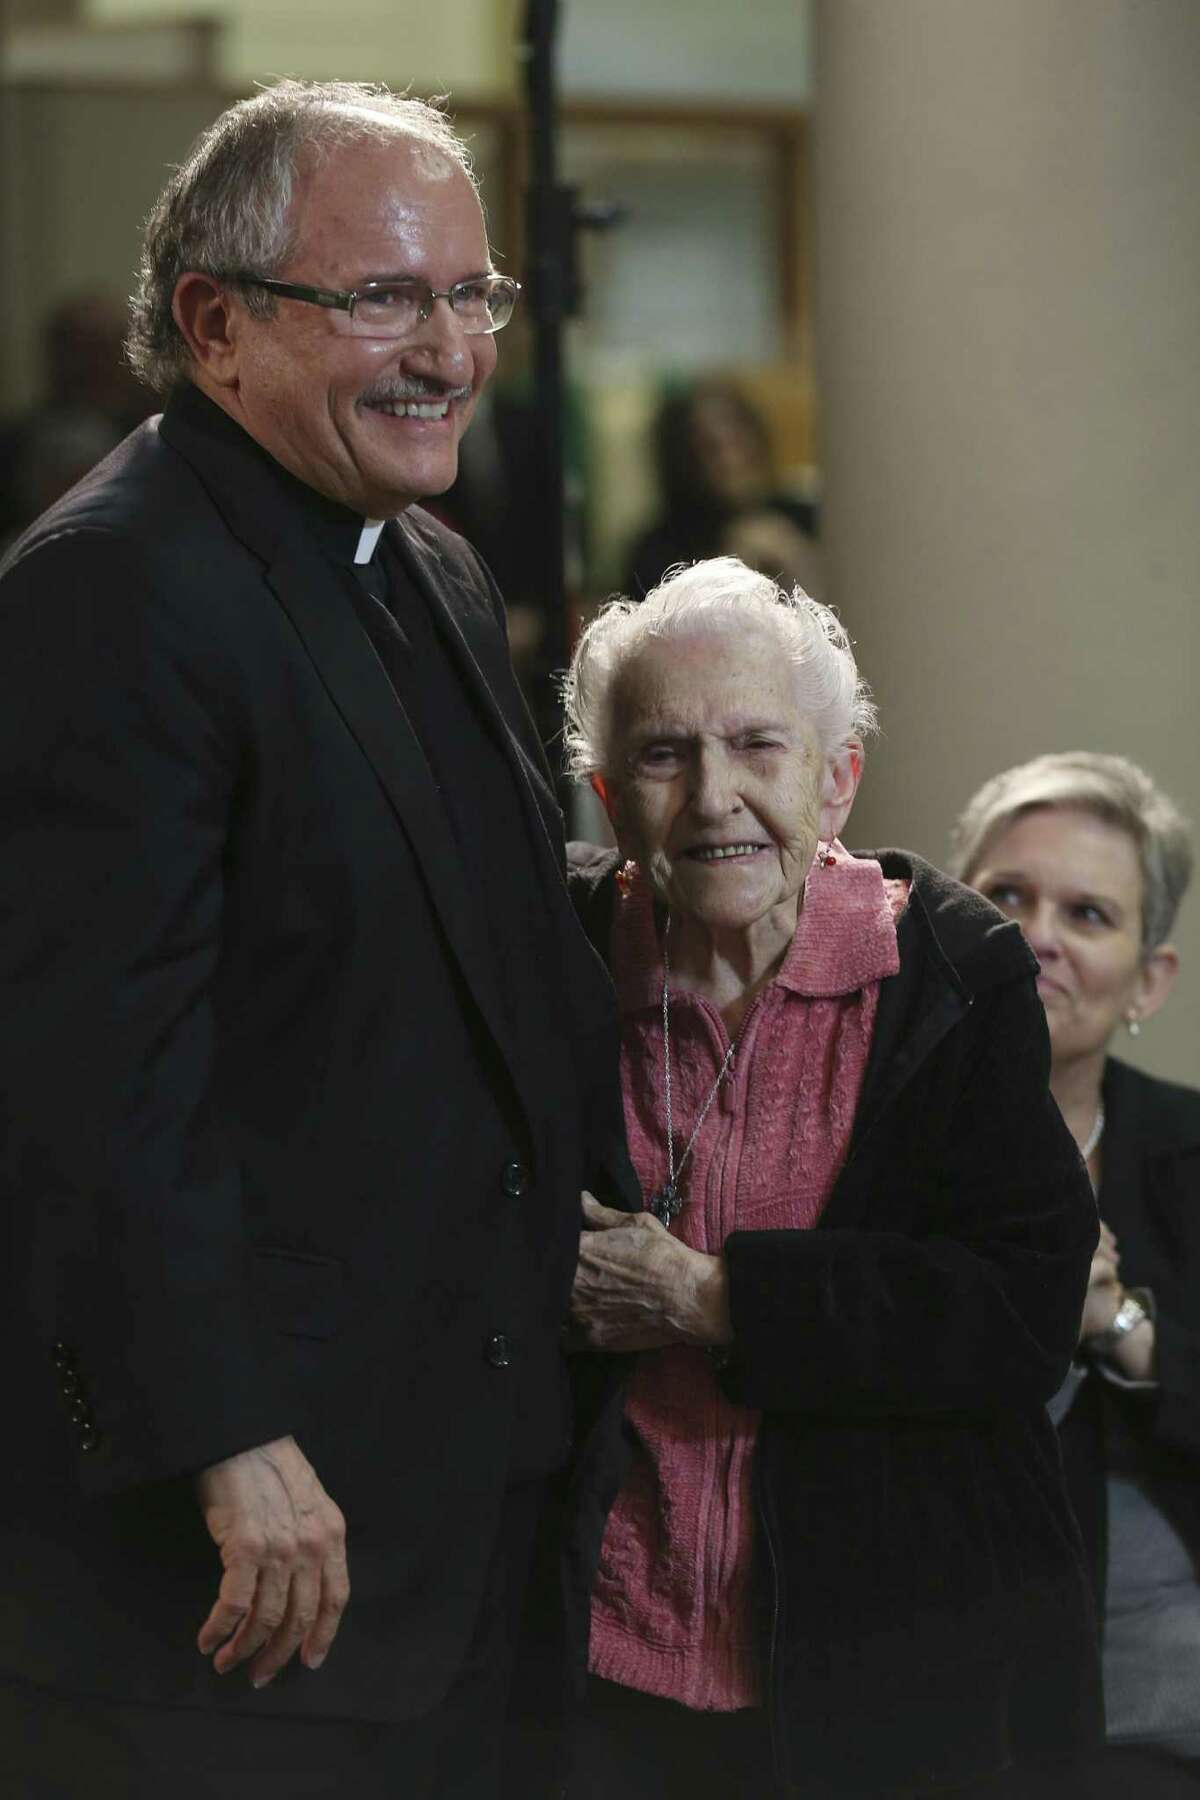 Monsignor Michael Joseph Boulette hugs his mother, Pat Boulette, 96, after his appointment as auxiliary bishop of the Archdiocese of San Antonio was announced Monday. Boulette was born in New York state, but grew up in Fredericksburg and attended high school in San Antonio.